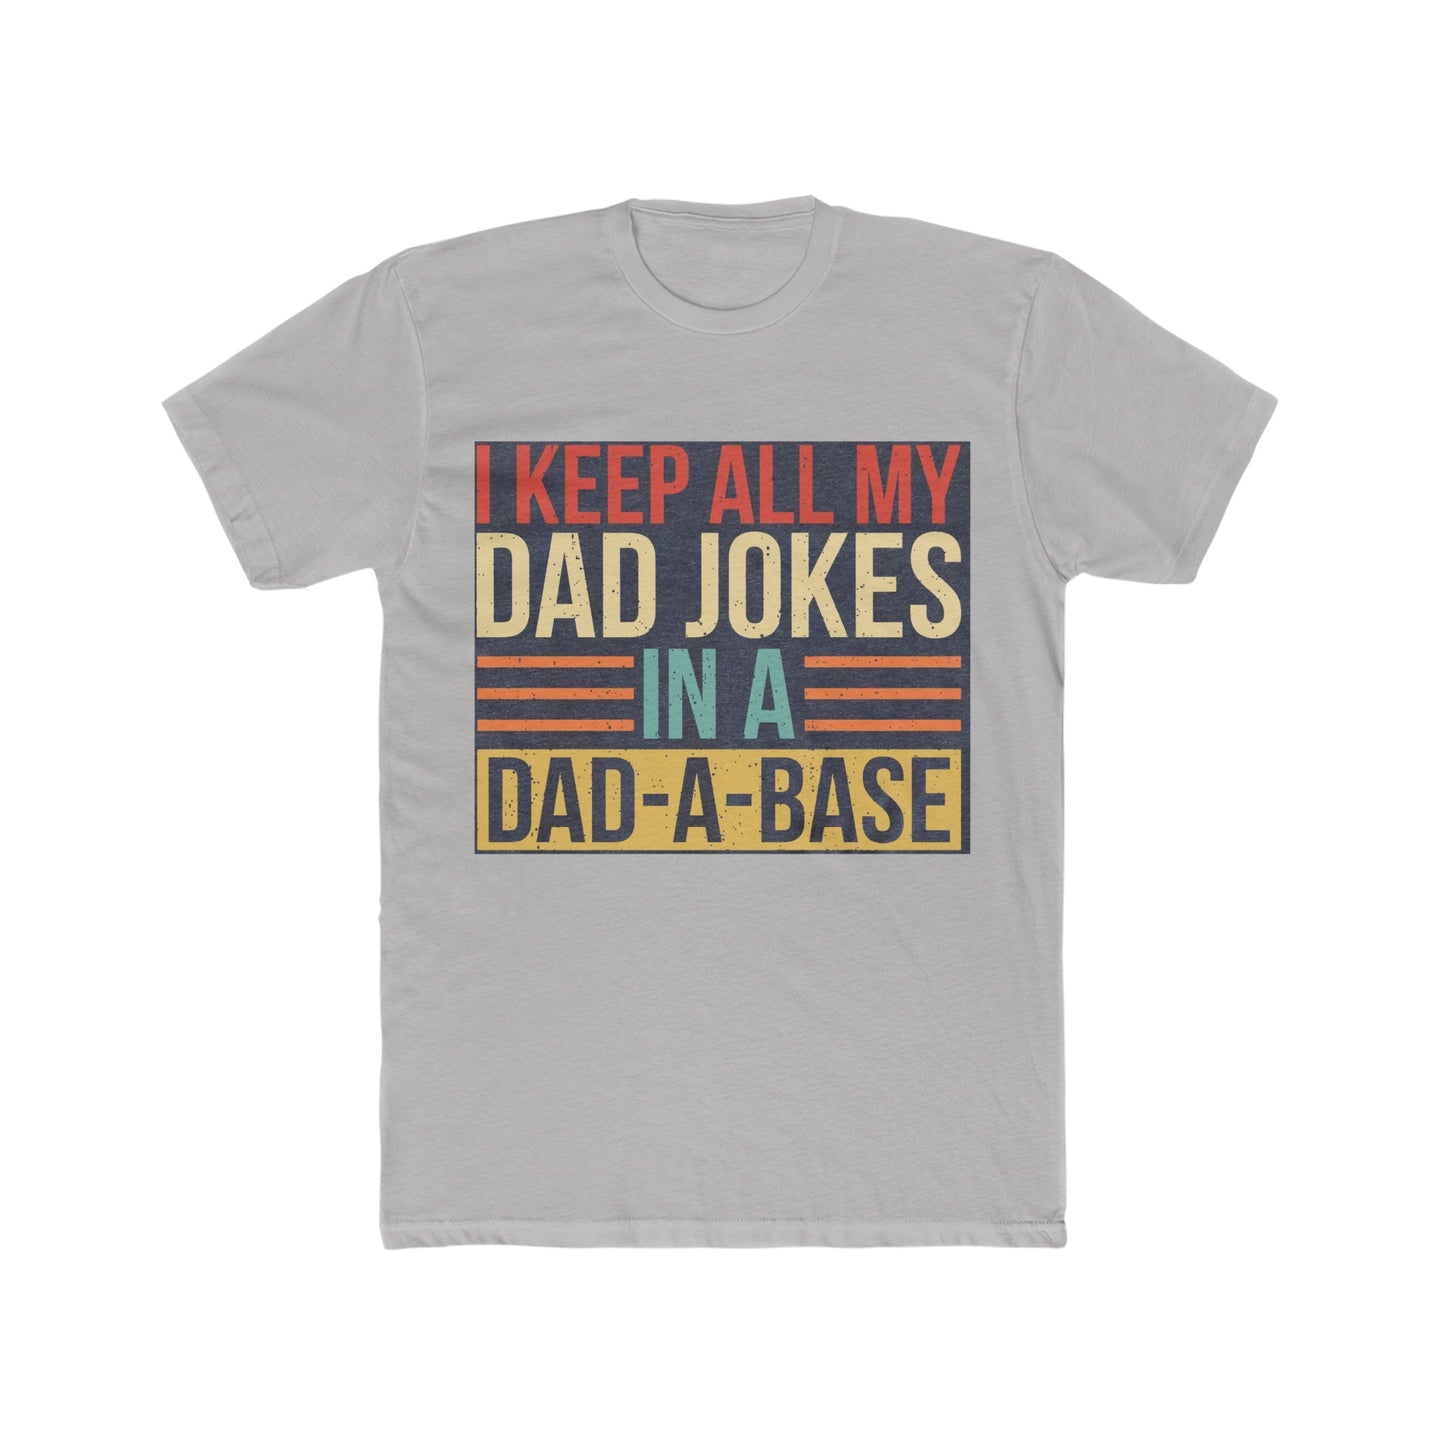 I Keep All My Jokes In A Dad-A-Base Shirt, NEW Dad Shirt, Dad Shirt, Daddy Shirt, Father’s Day Shirt, Best Dad Shirt, Gift For Dad